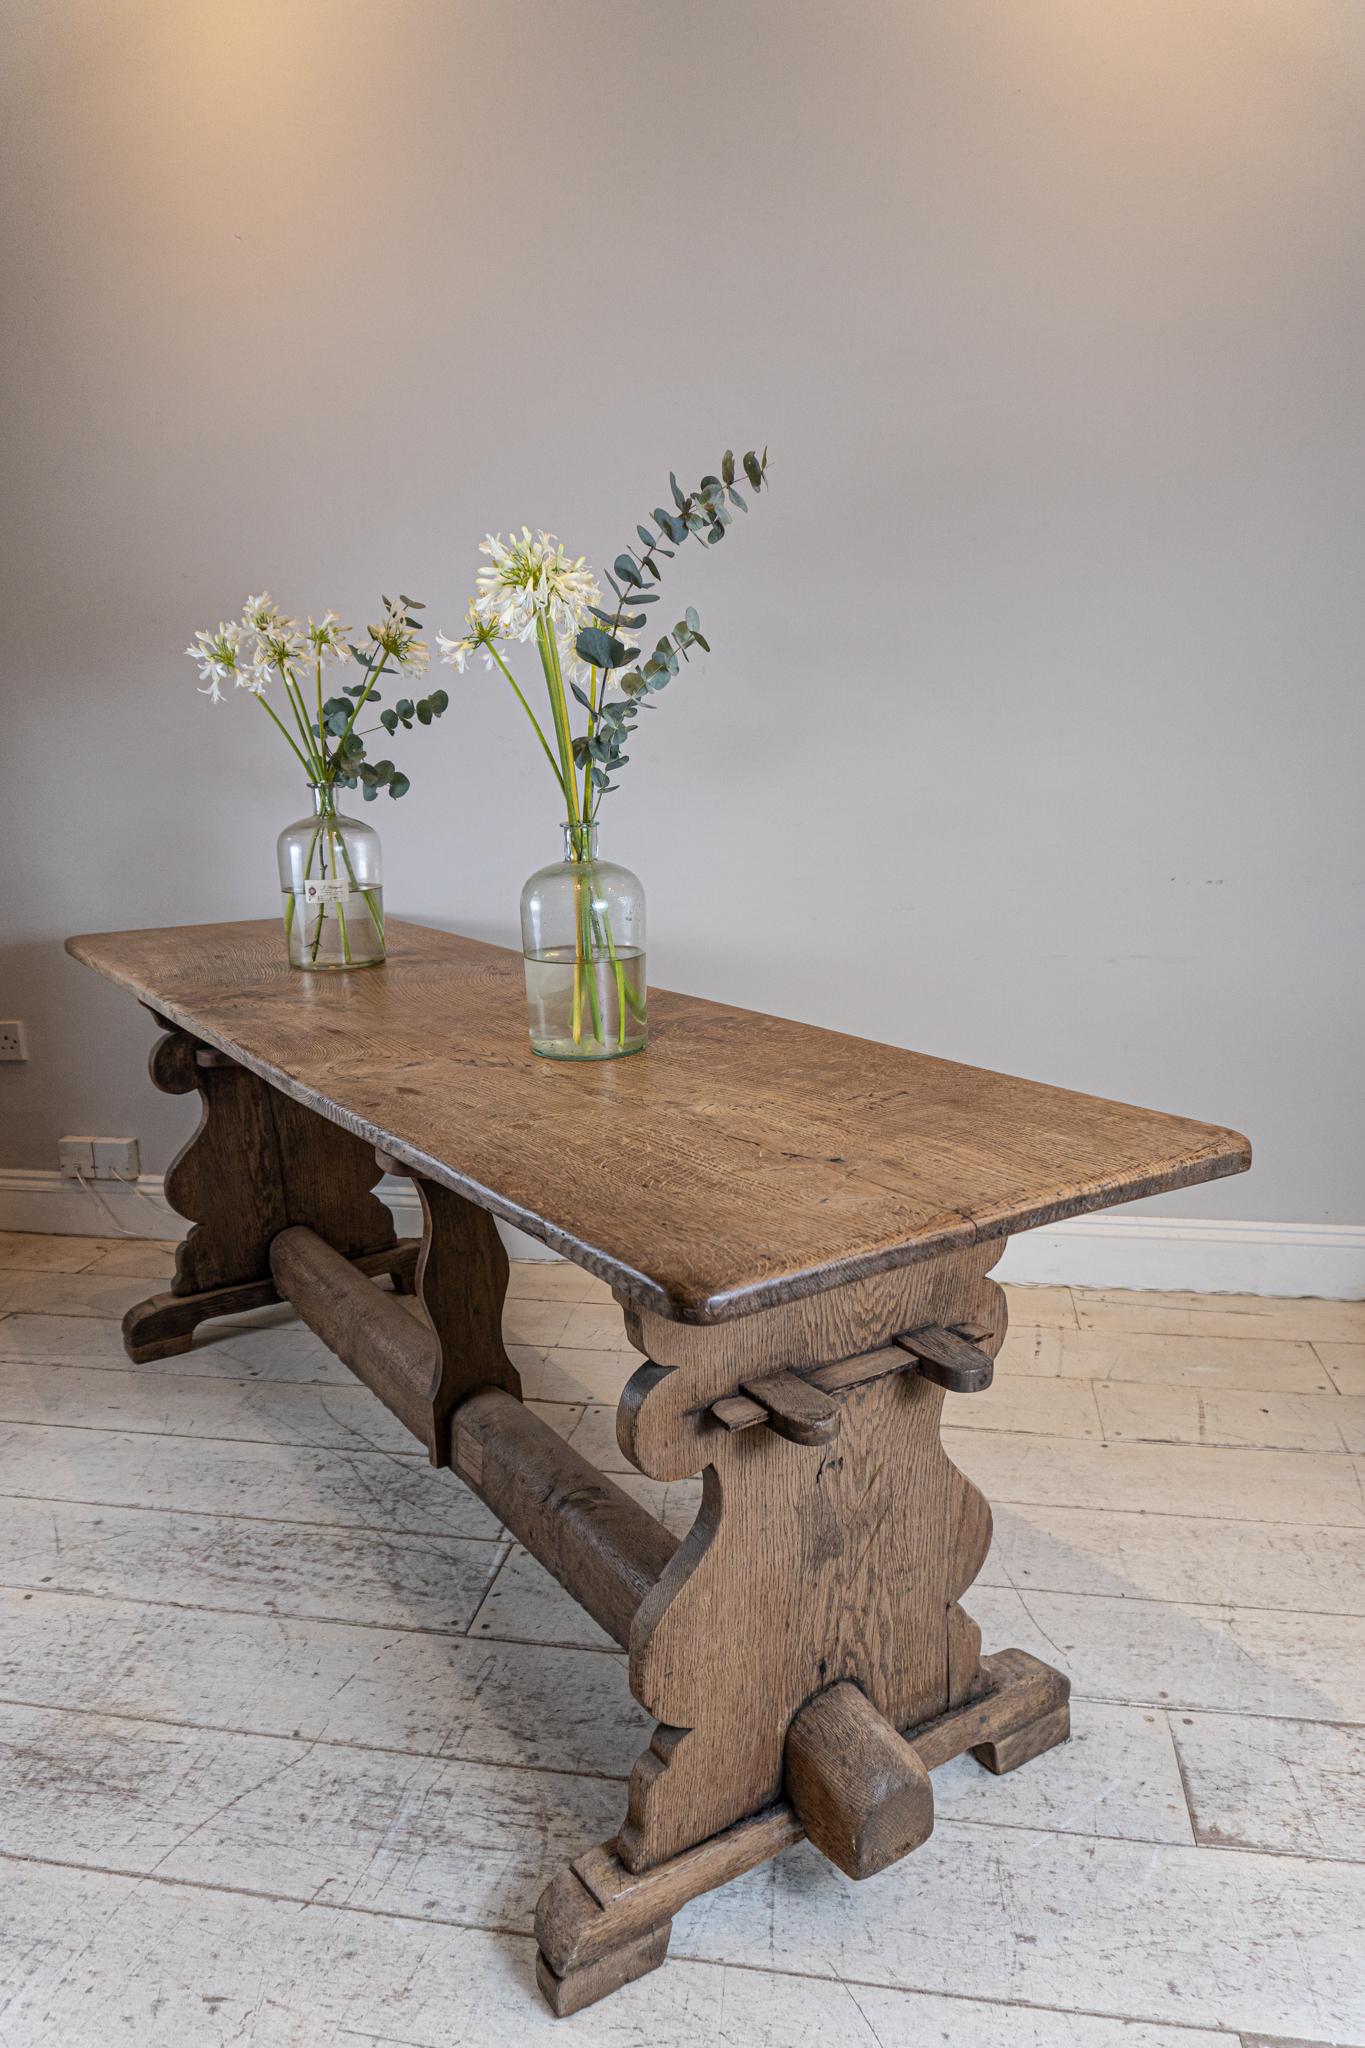 This North Country dining table is made of oak and has a wonderful one plank top.

Almost Scandinavian in feel and style with its decorative side supports and unusual stretcher.
The table although narrow in depth is comfortable to sit at and will